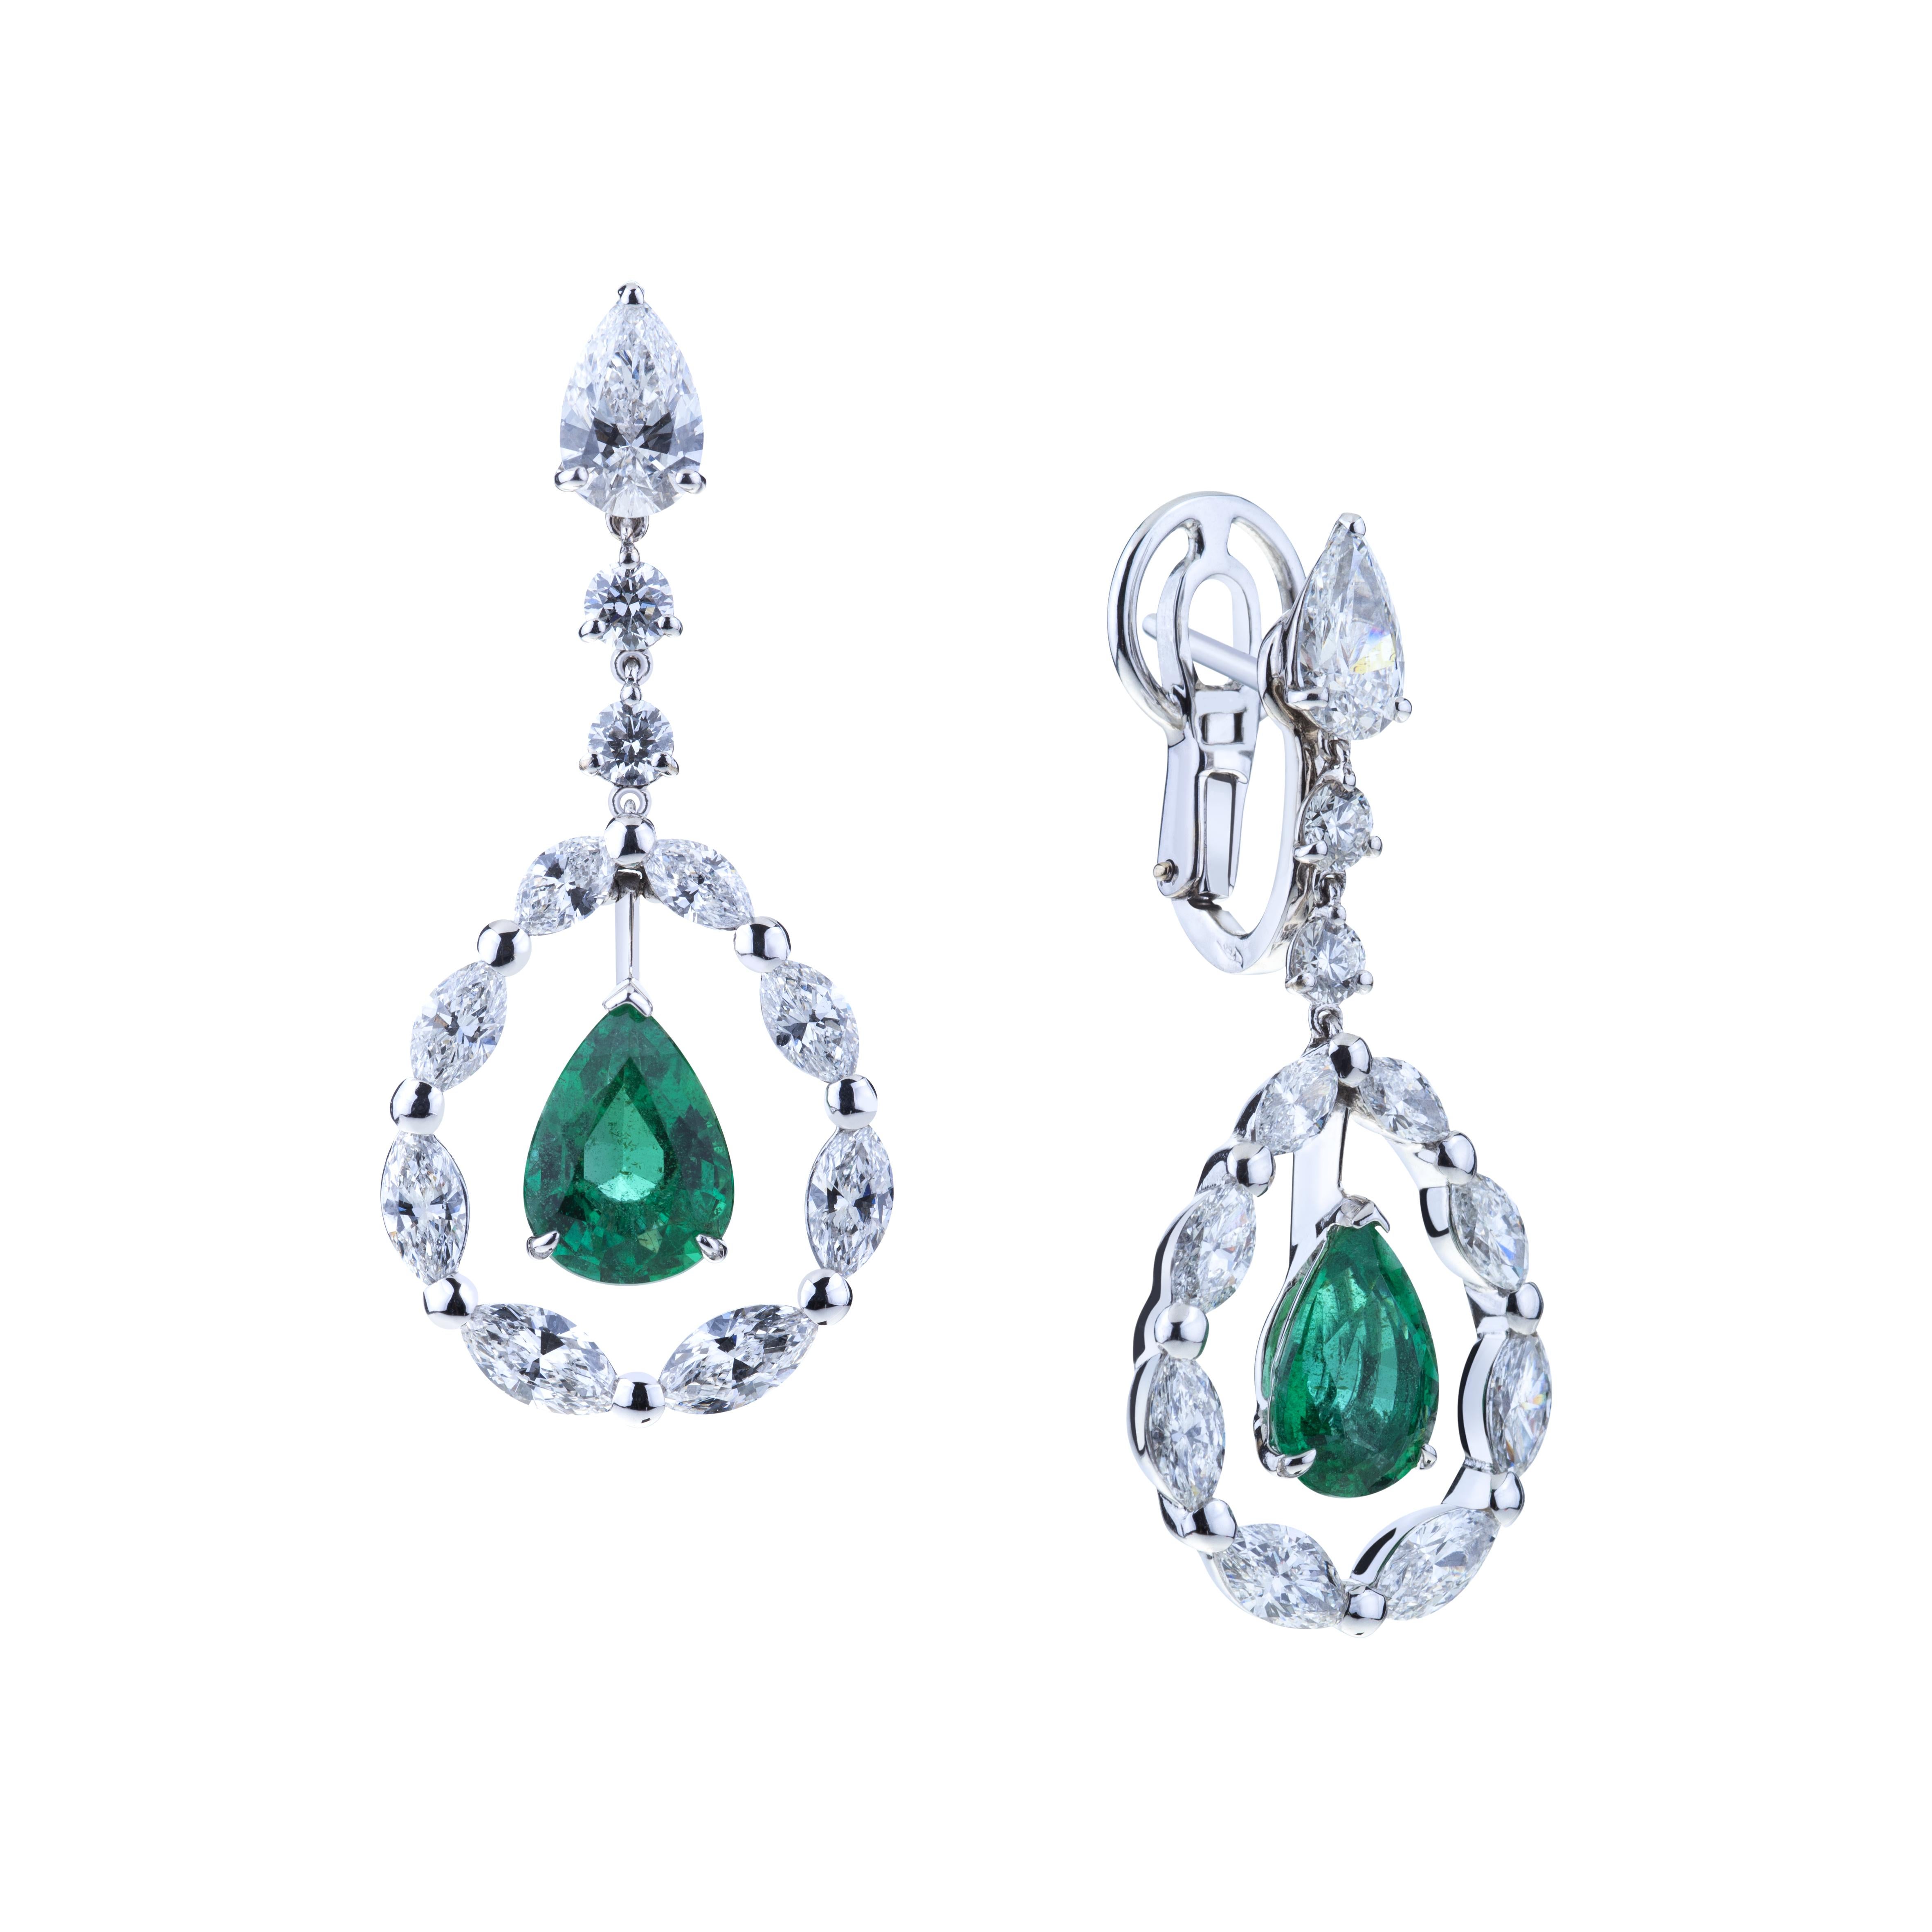 Pendant Drop Emerald Earrings in a Circle of  Navette Diamonds and Solitaire.
Delicious Proportion for a Couple of Drop Emerald ct. 2.65 (NH) in a circle of Light given by 8 Diamonds and Solitaire on top, total ct. 3.58. 18kt Gold wheight is 7.4